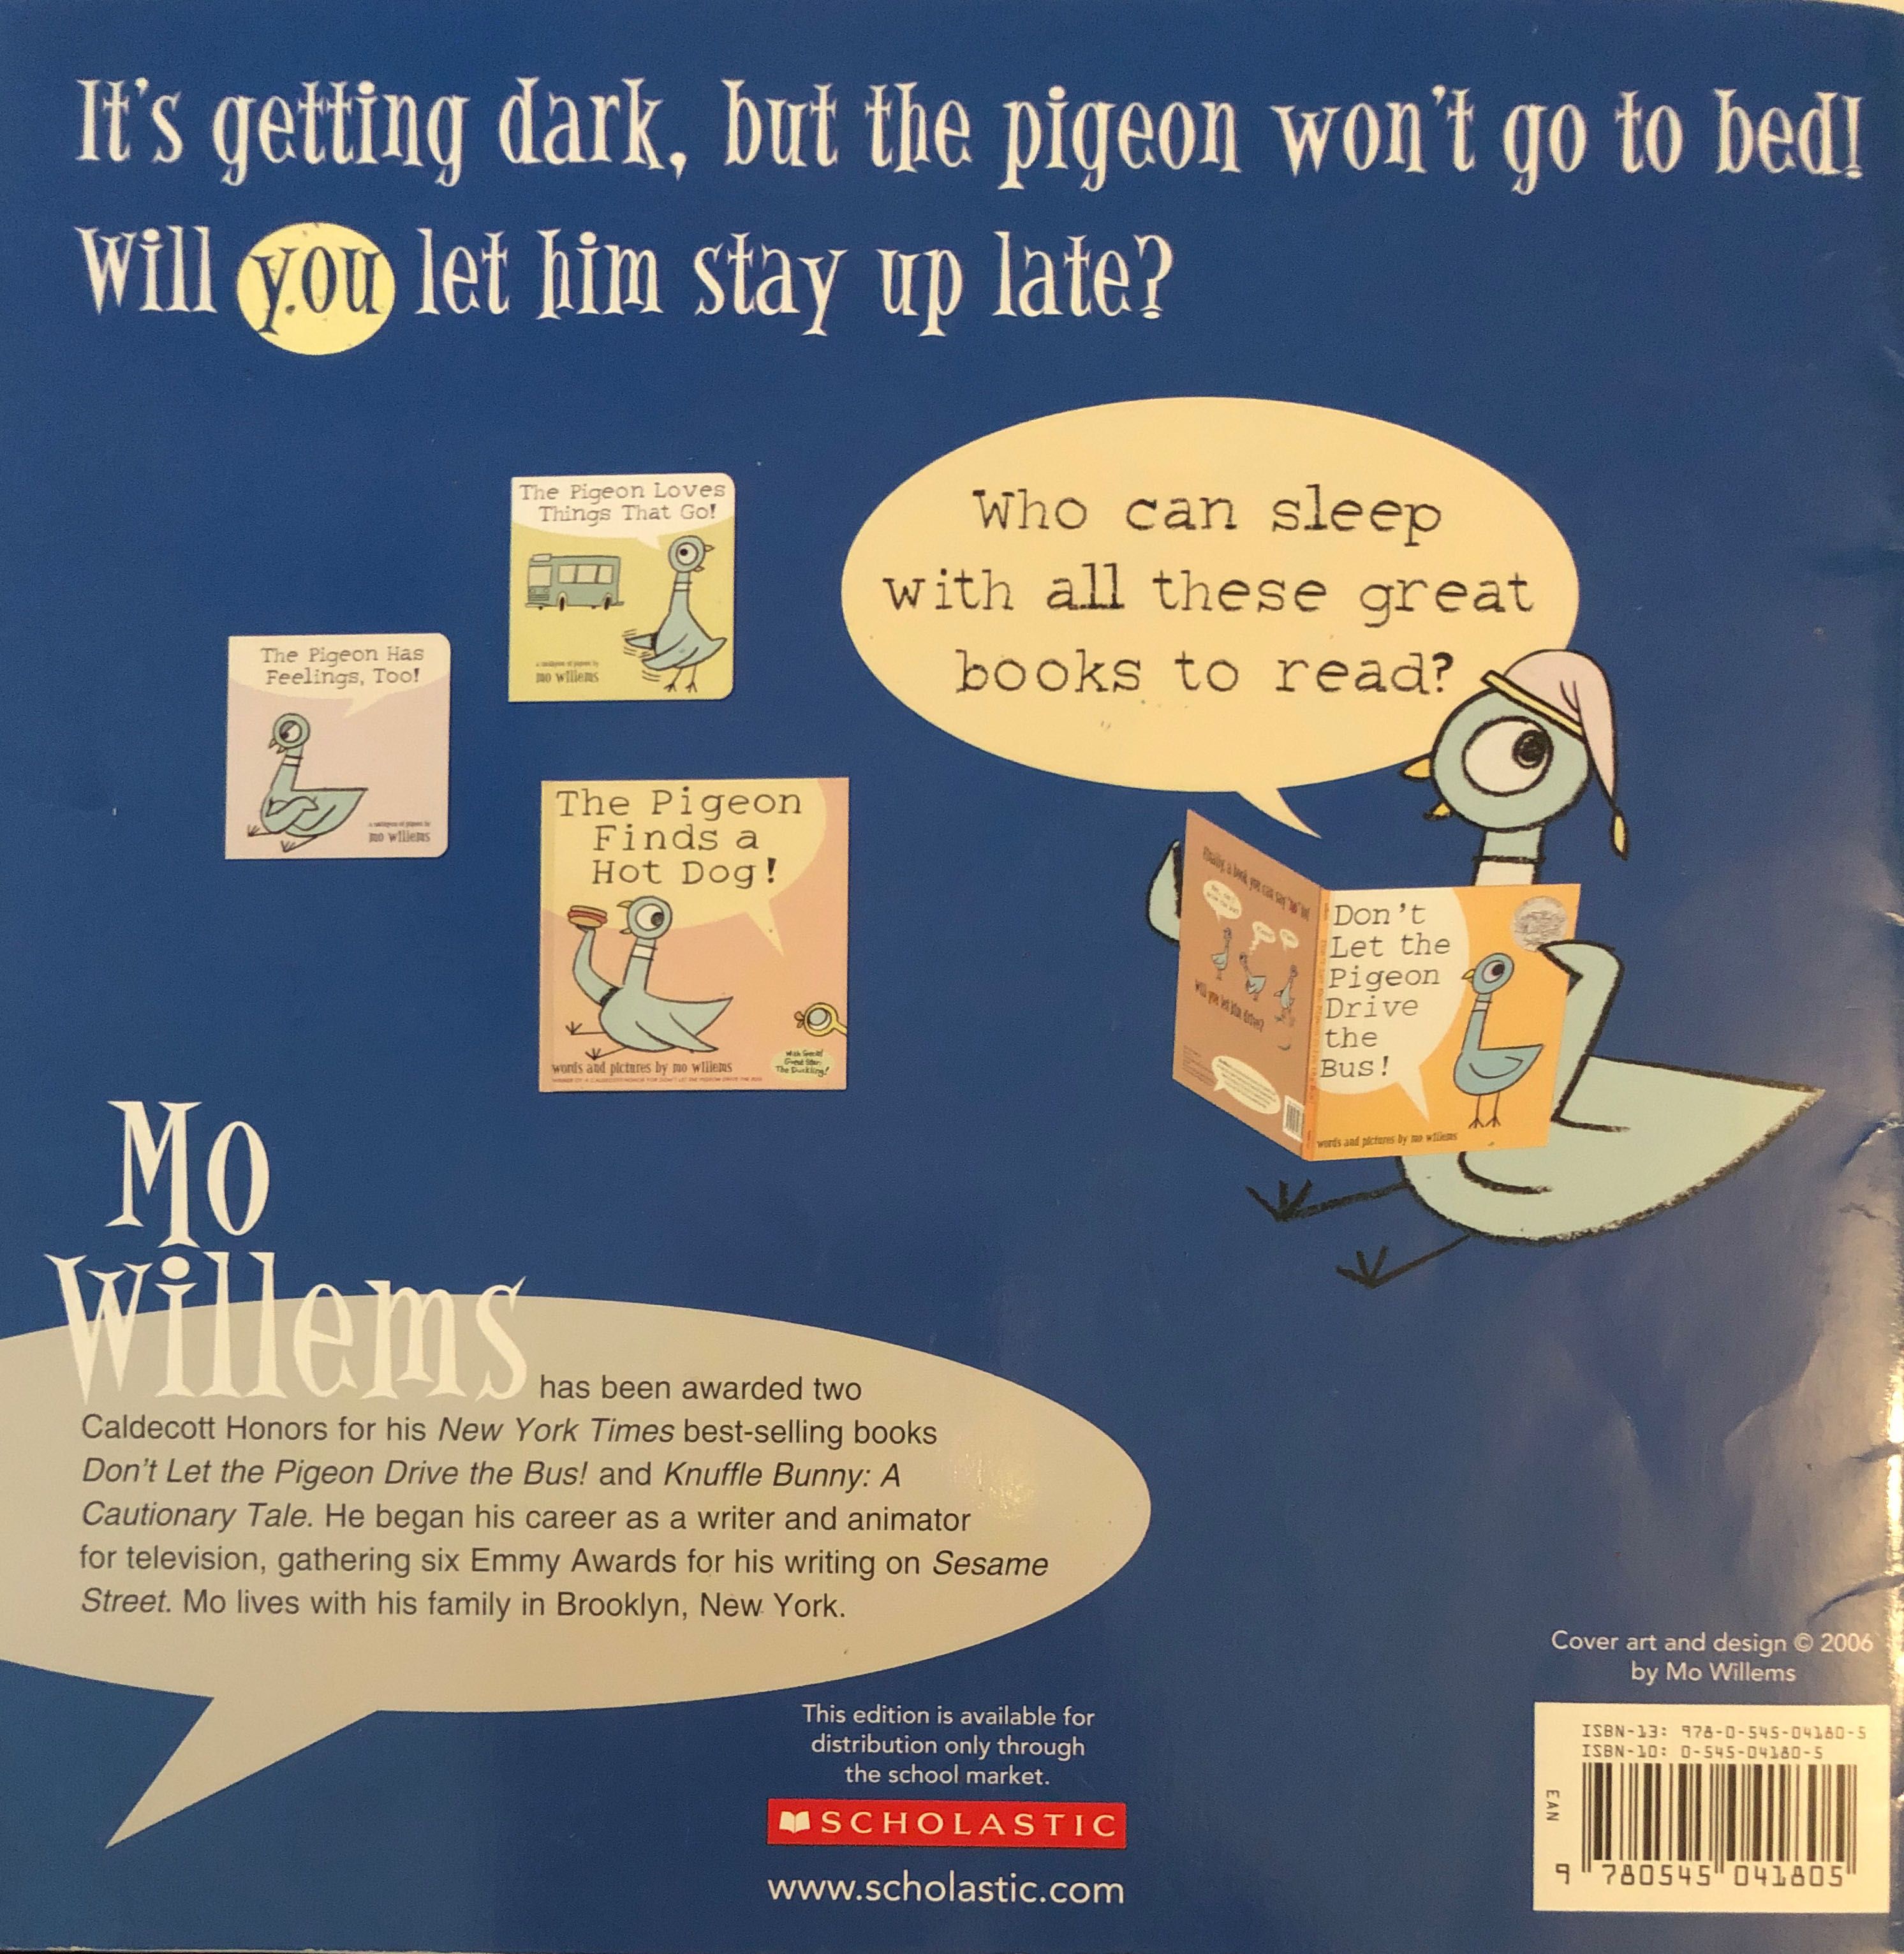 Don’t Let The Pigeon Stay Up Late! - Mo Willems (Scholastic Inc. - Paperback) book collectible [Barcode 9780545041805] - Main Image 2